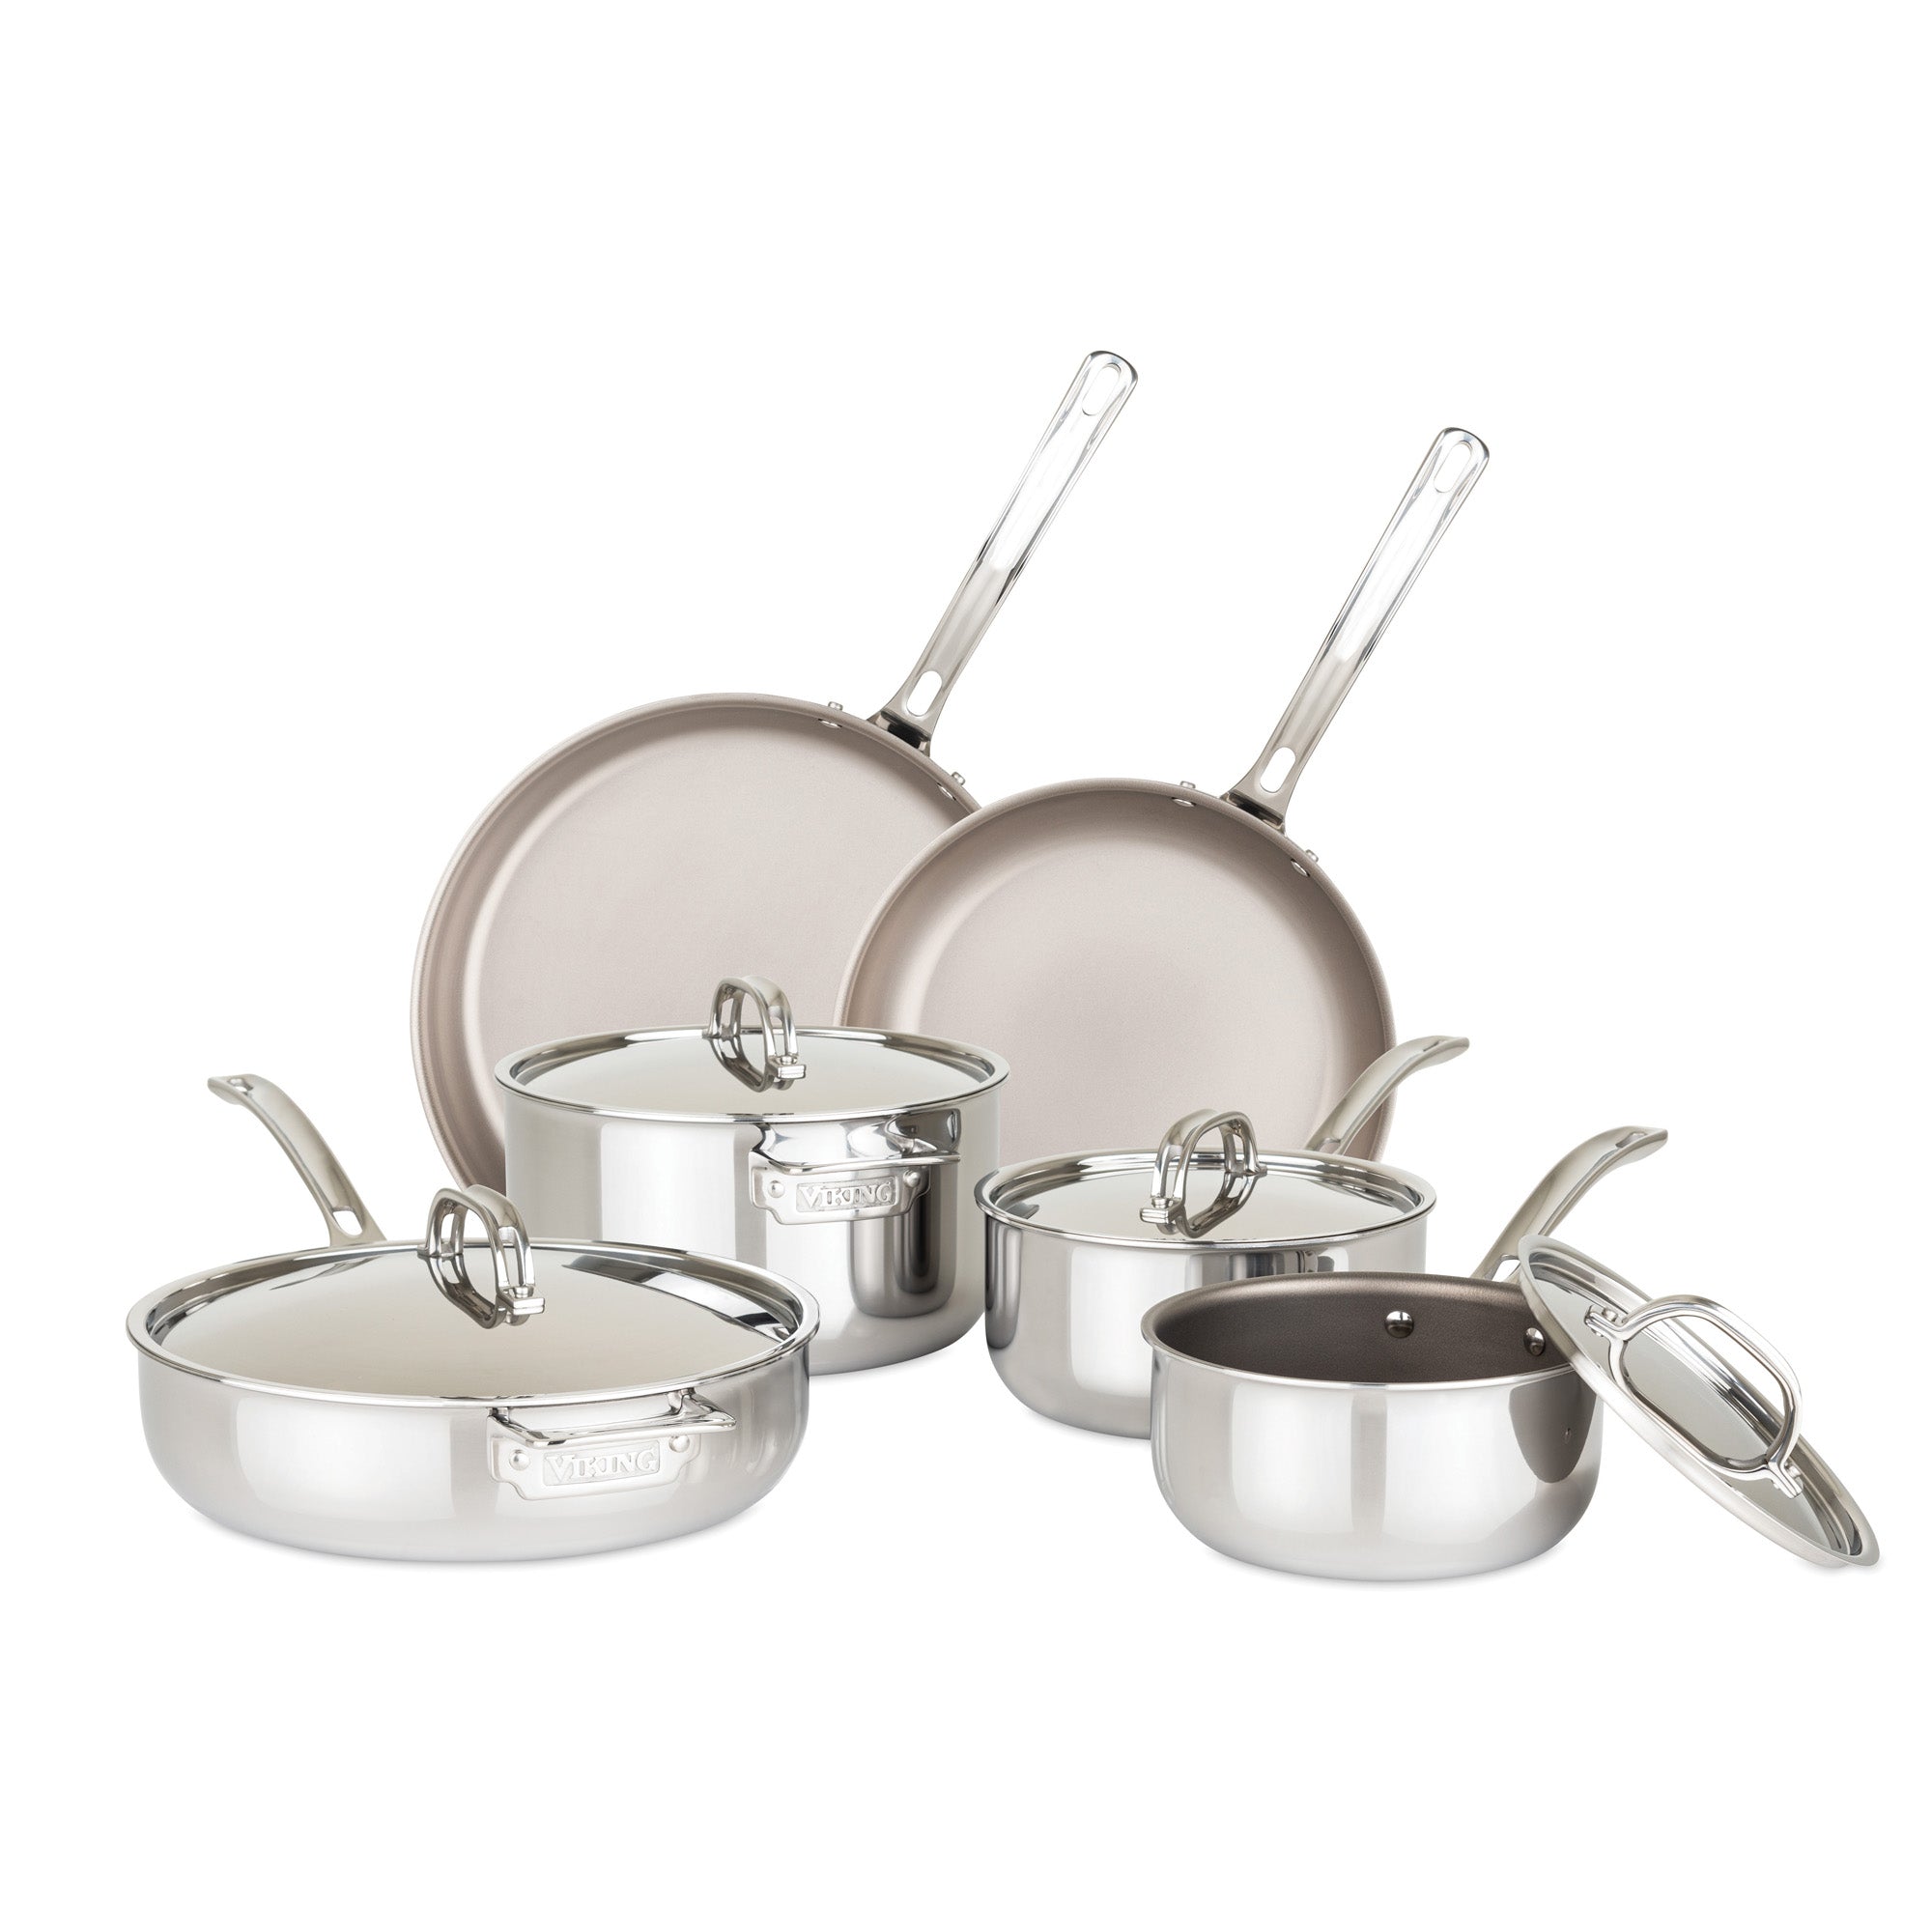 The Stainless Sets